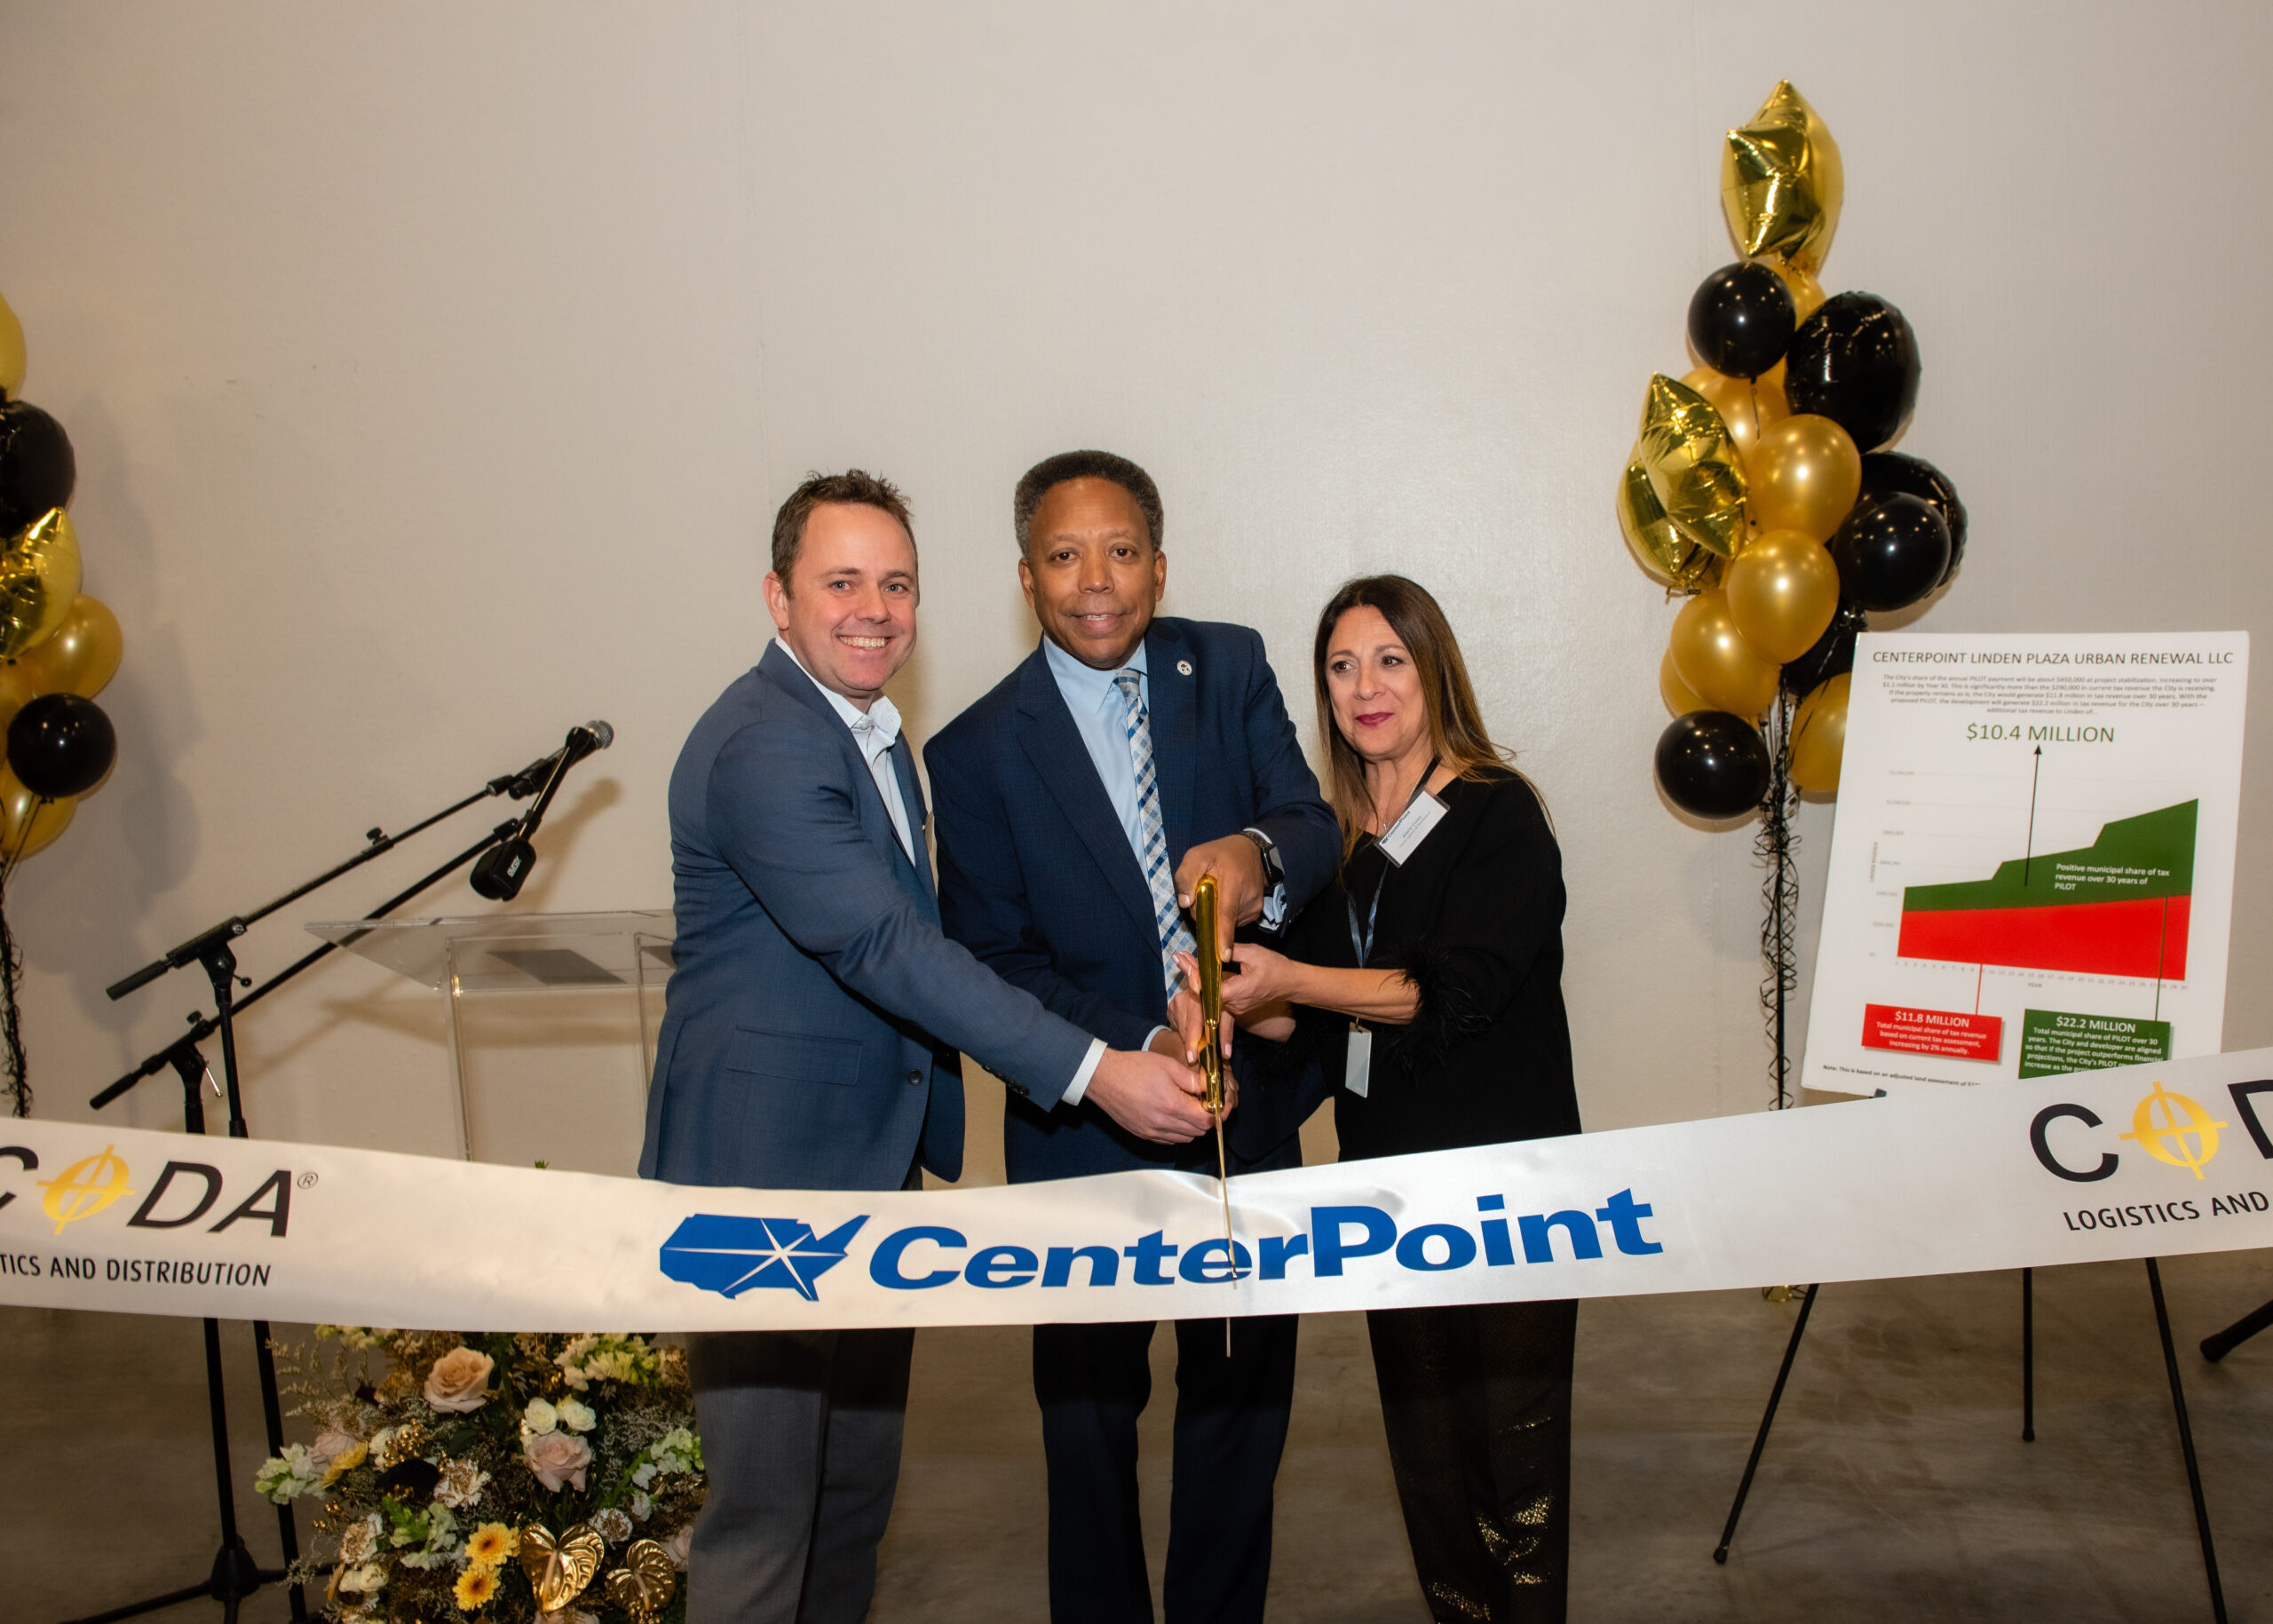 CenterPoint at Linden Ribbon-Cutting Ceremony